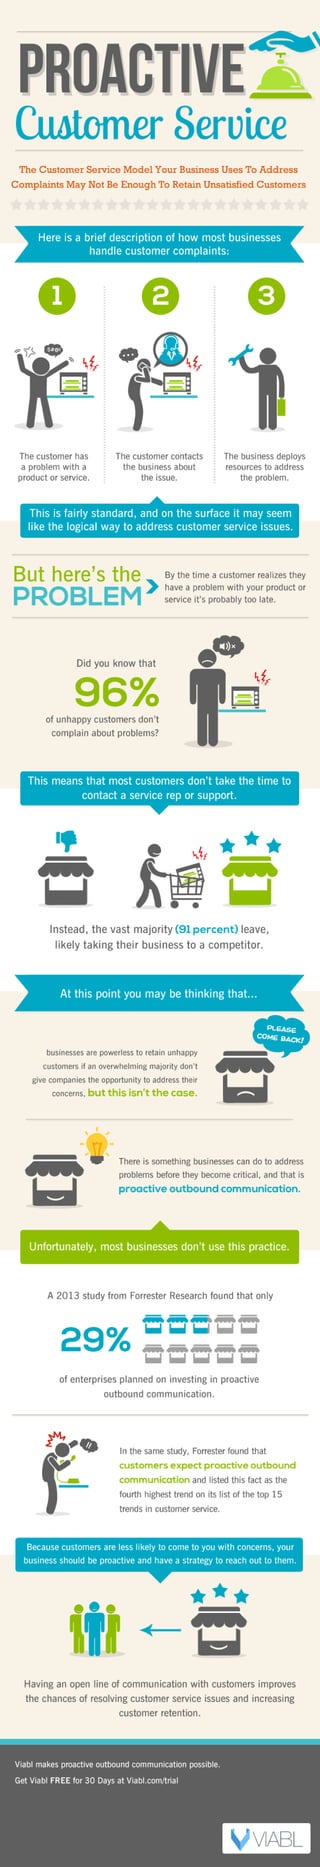 Proactive Customer Service (Infographic)